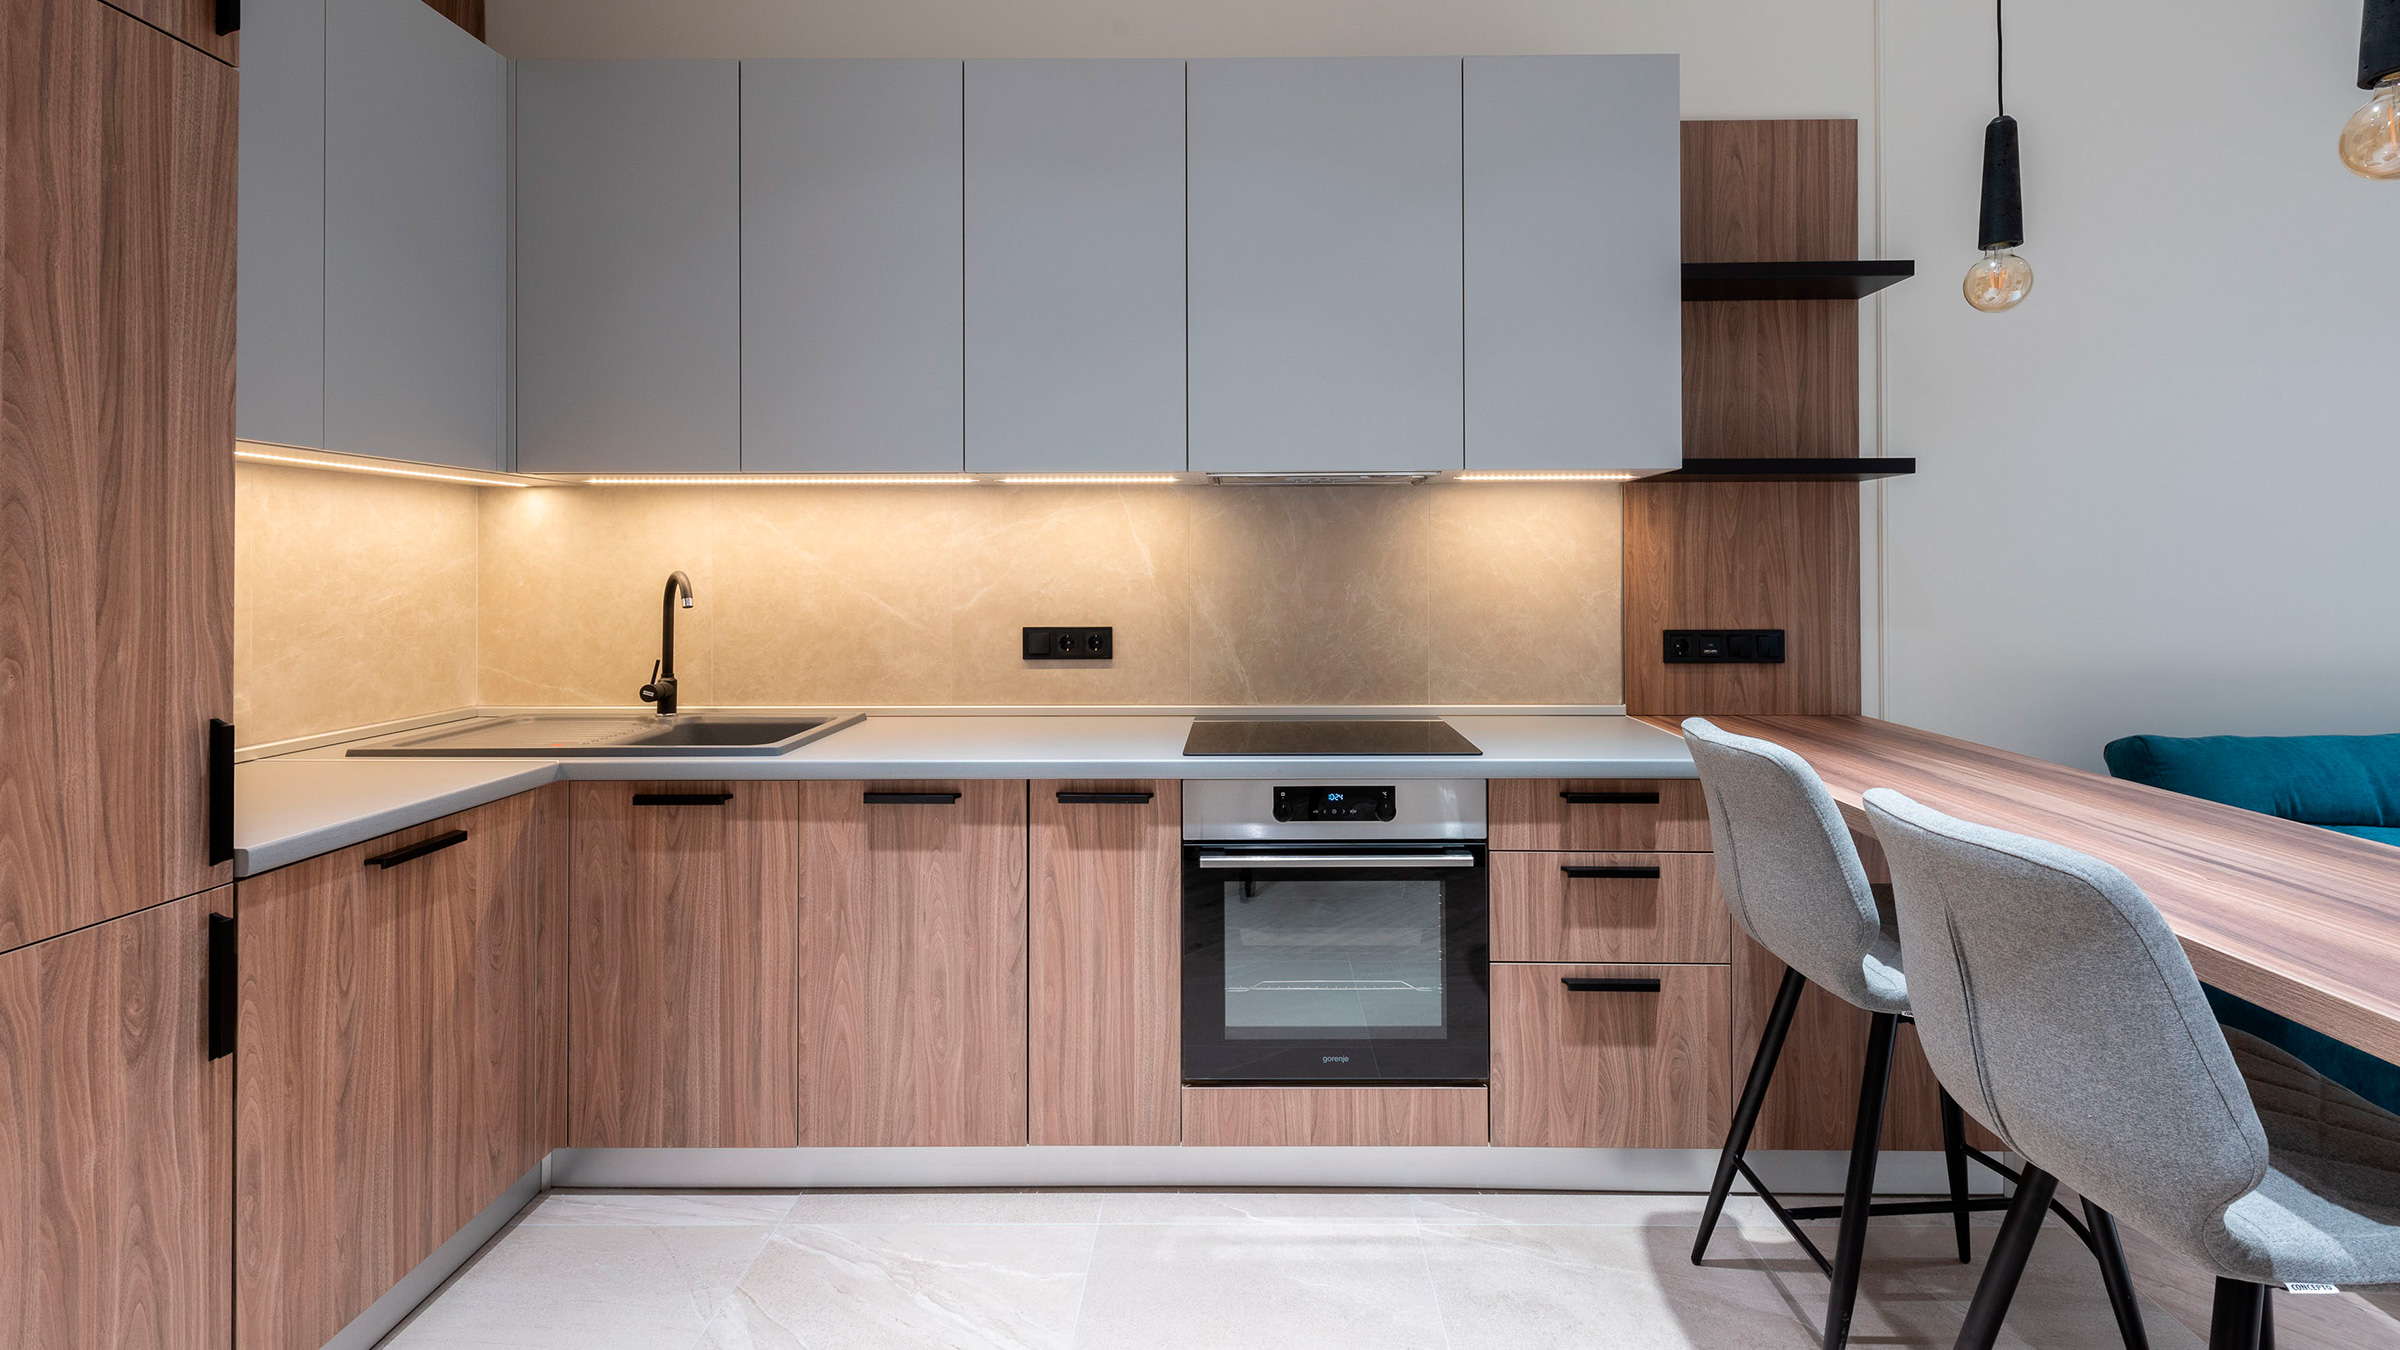 Current Kitchen Cabinet Trends Stealing the Show - REALTOR.ca Blog